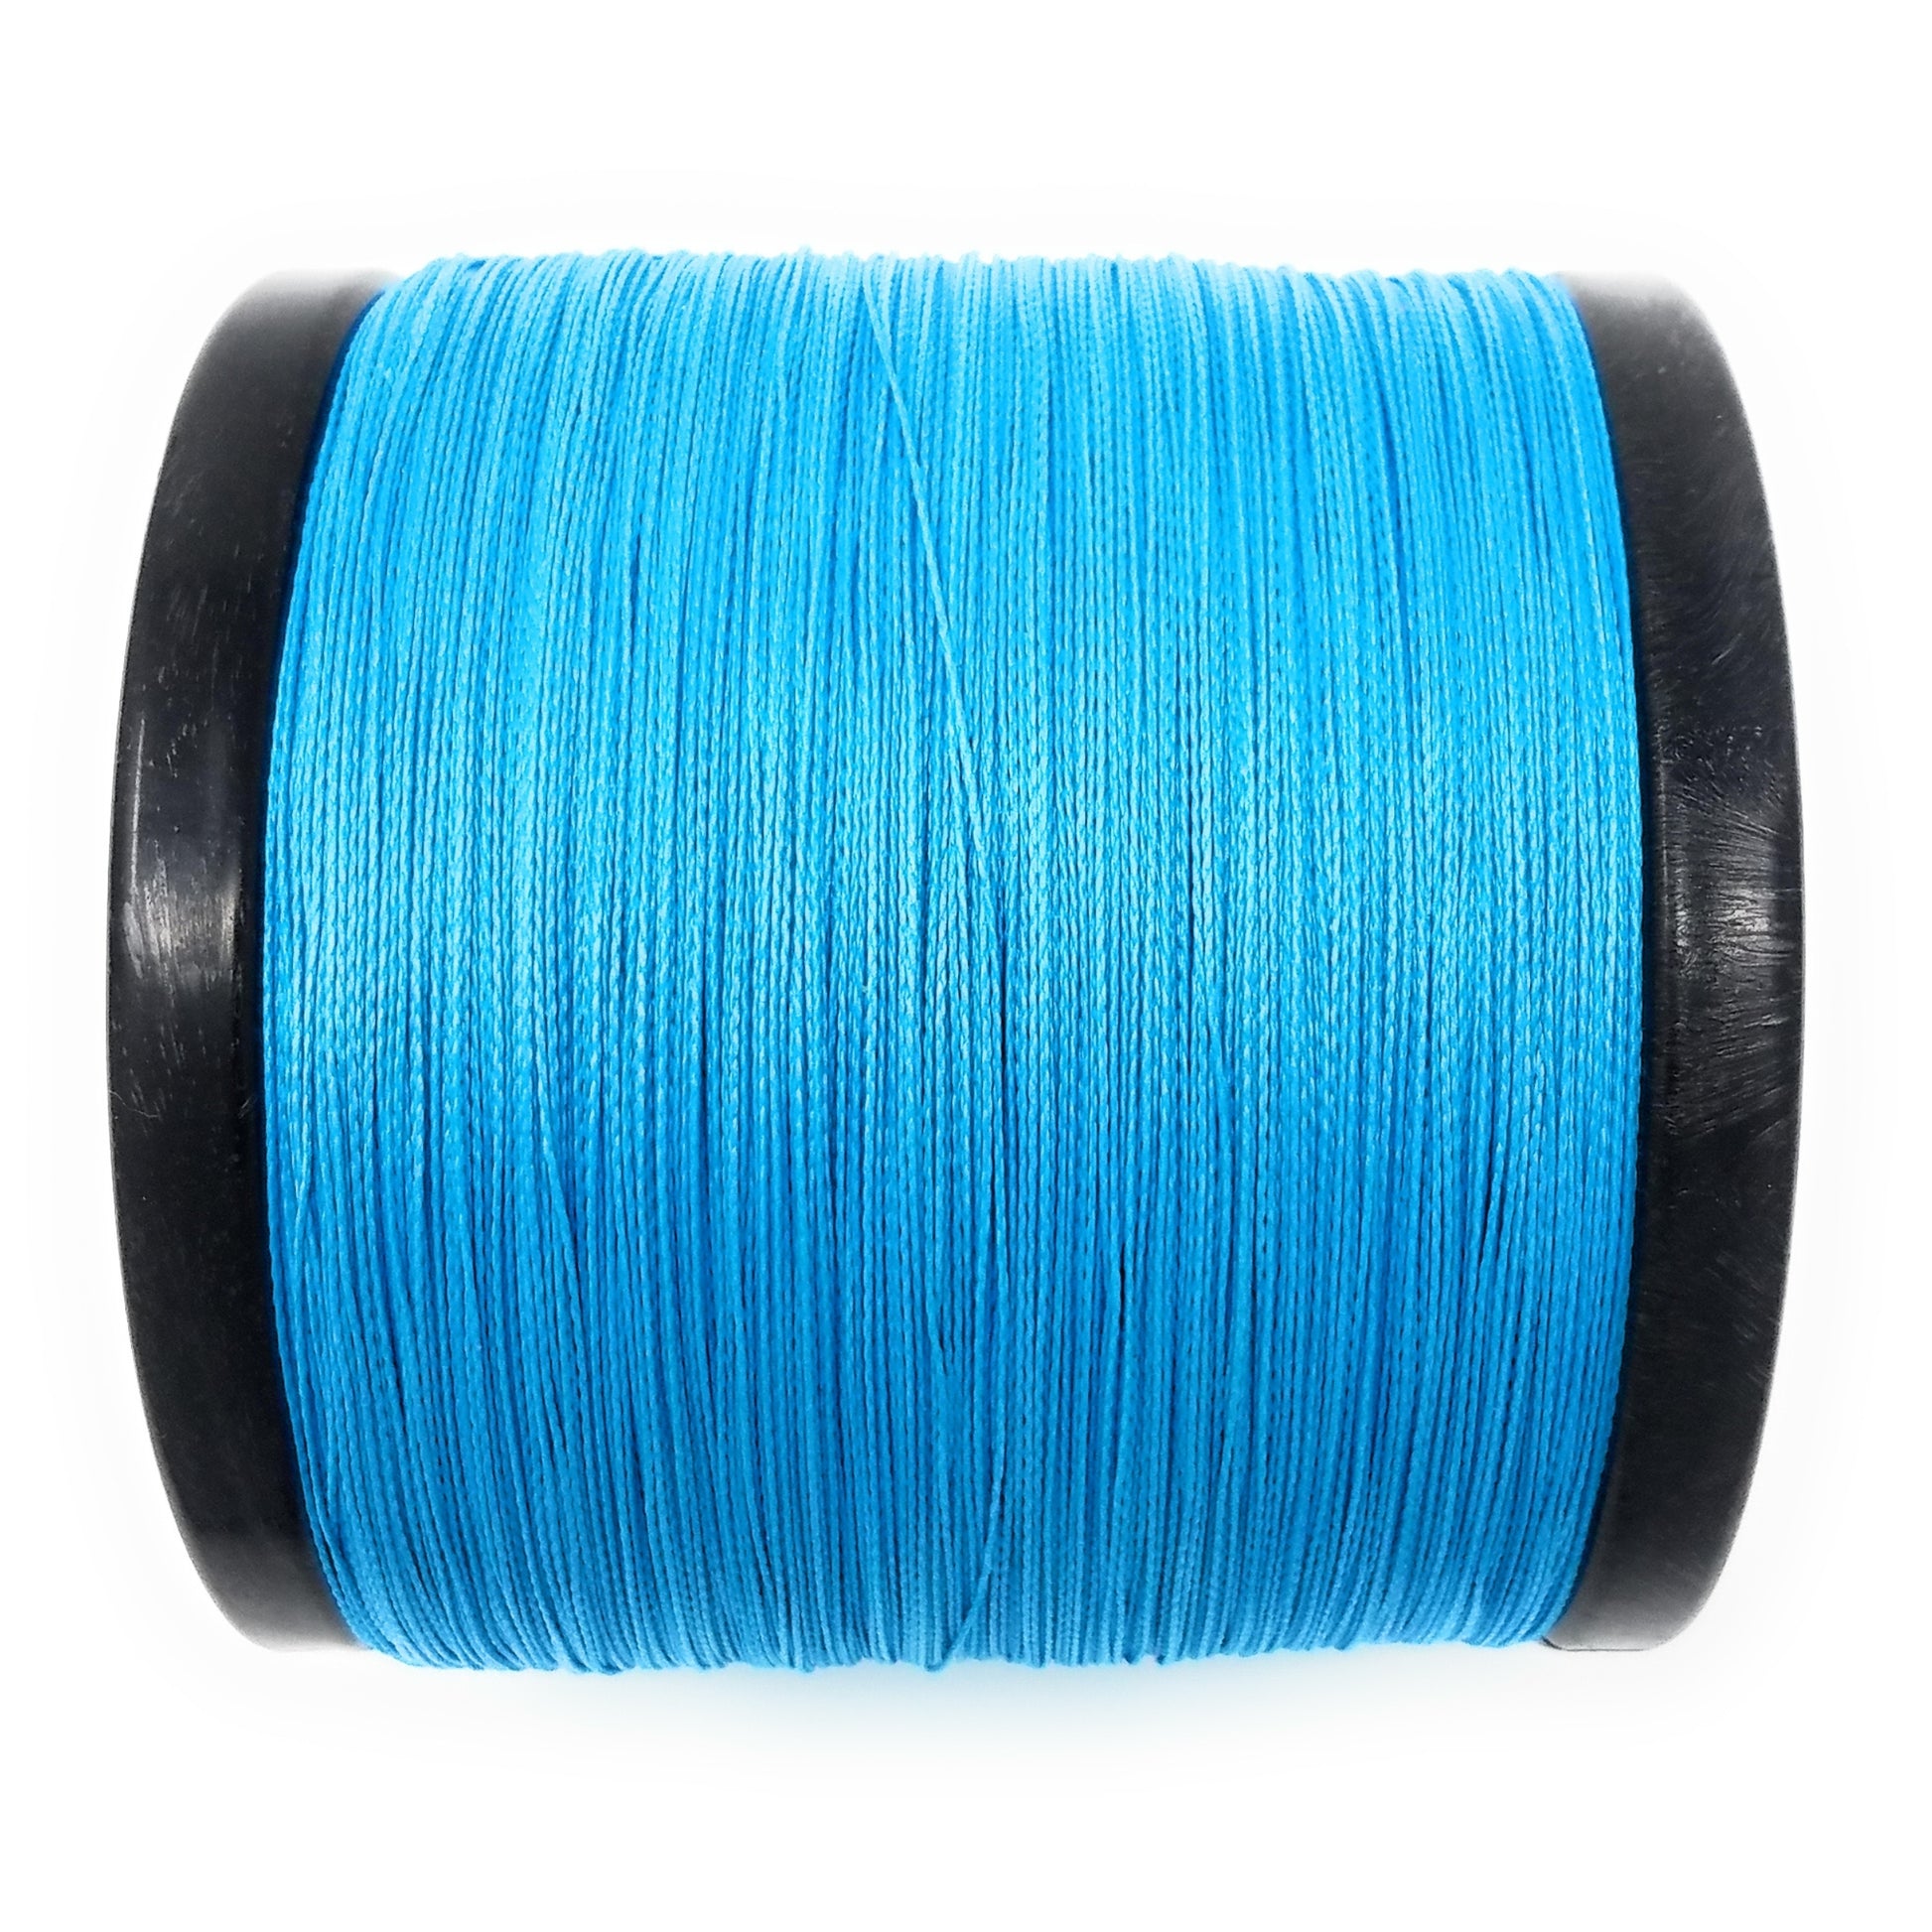 Reaction Tackle Braided Fishing Line Sea Blue 40lb 300yd